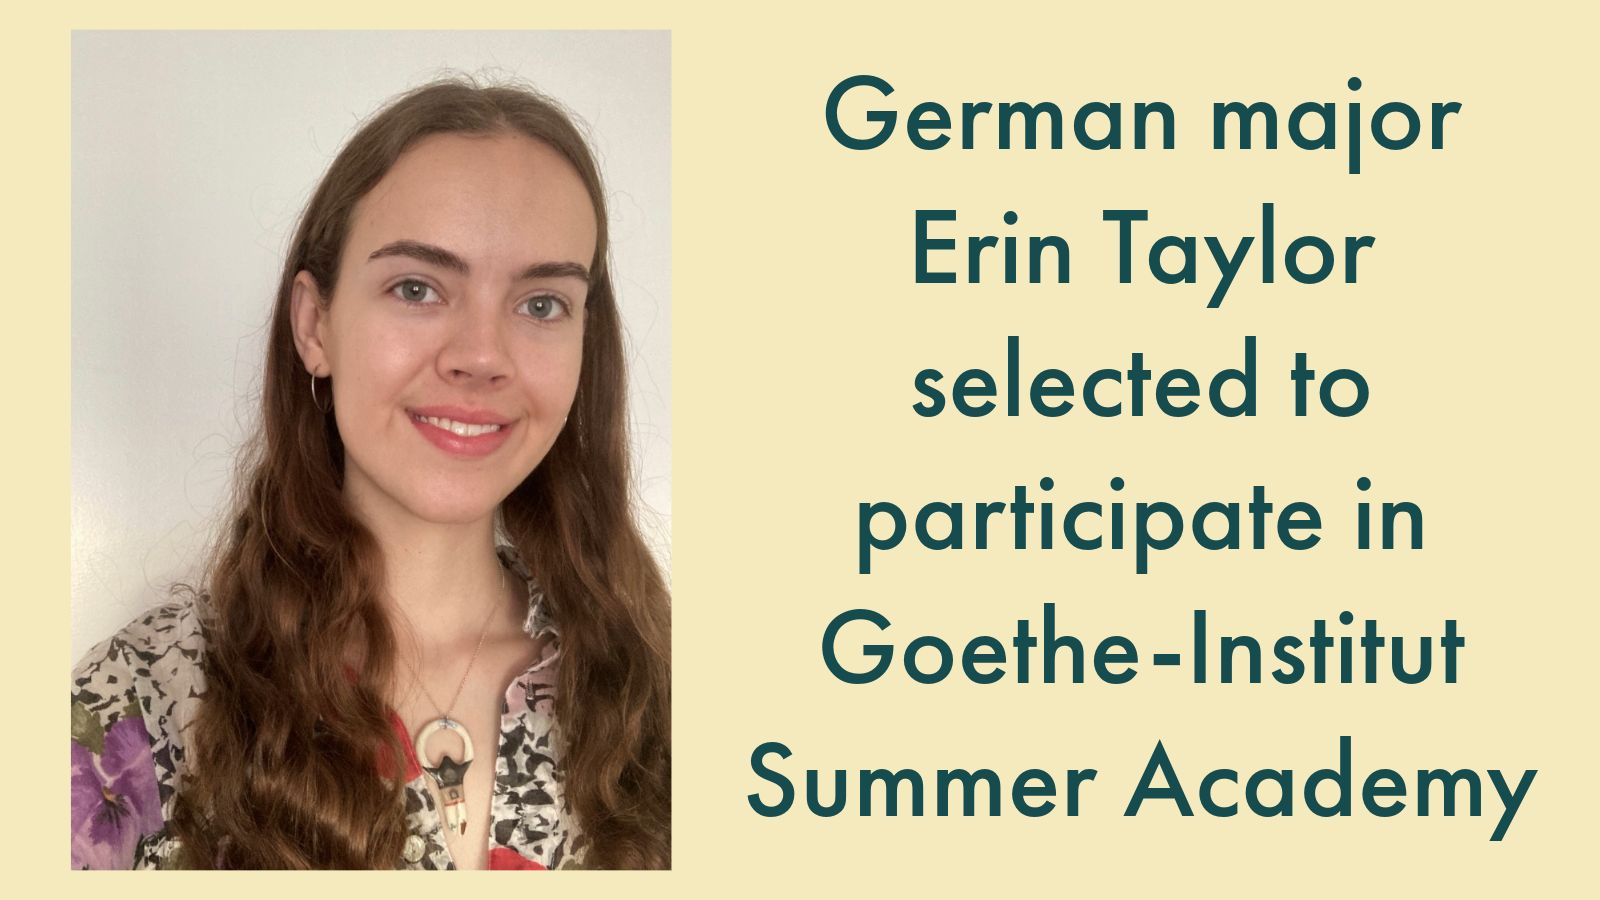 image: woman wearing necklace; text: German major Erin Taylor selected to participate in Goethe-Institut Summer Academy